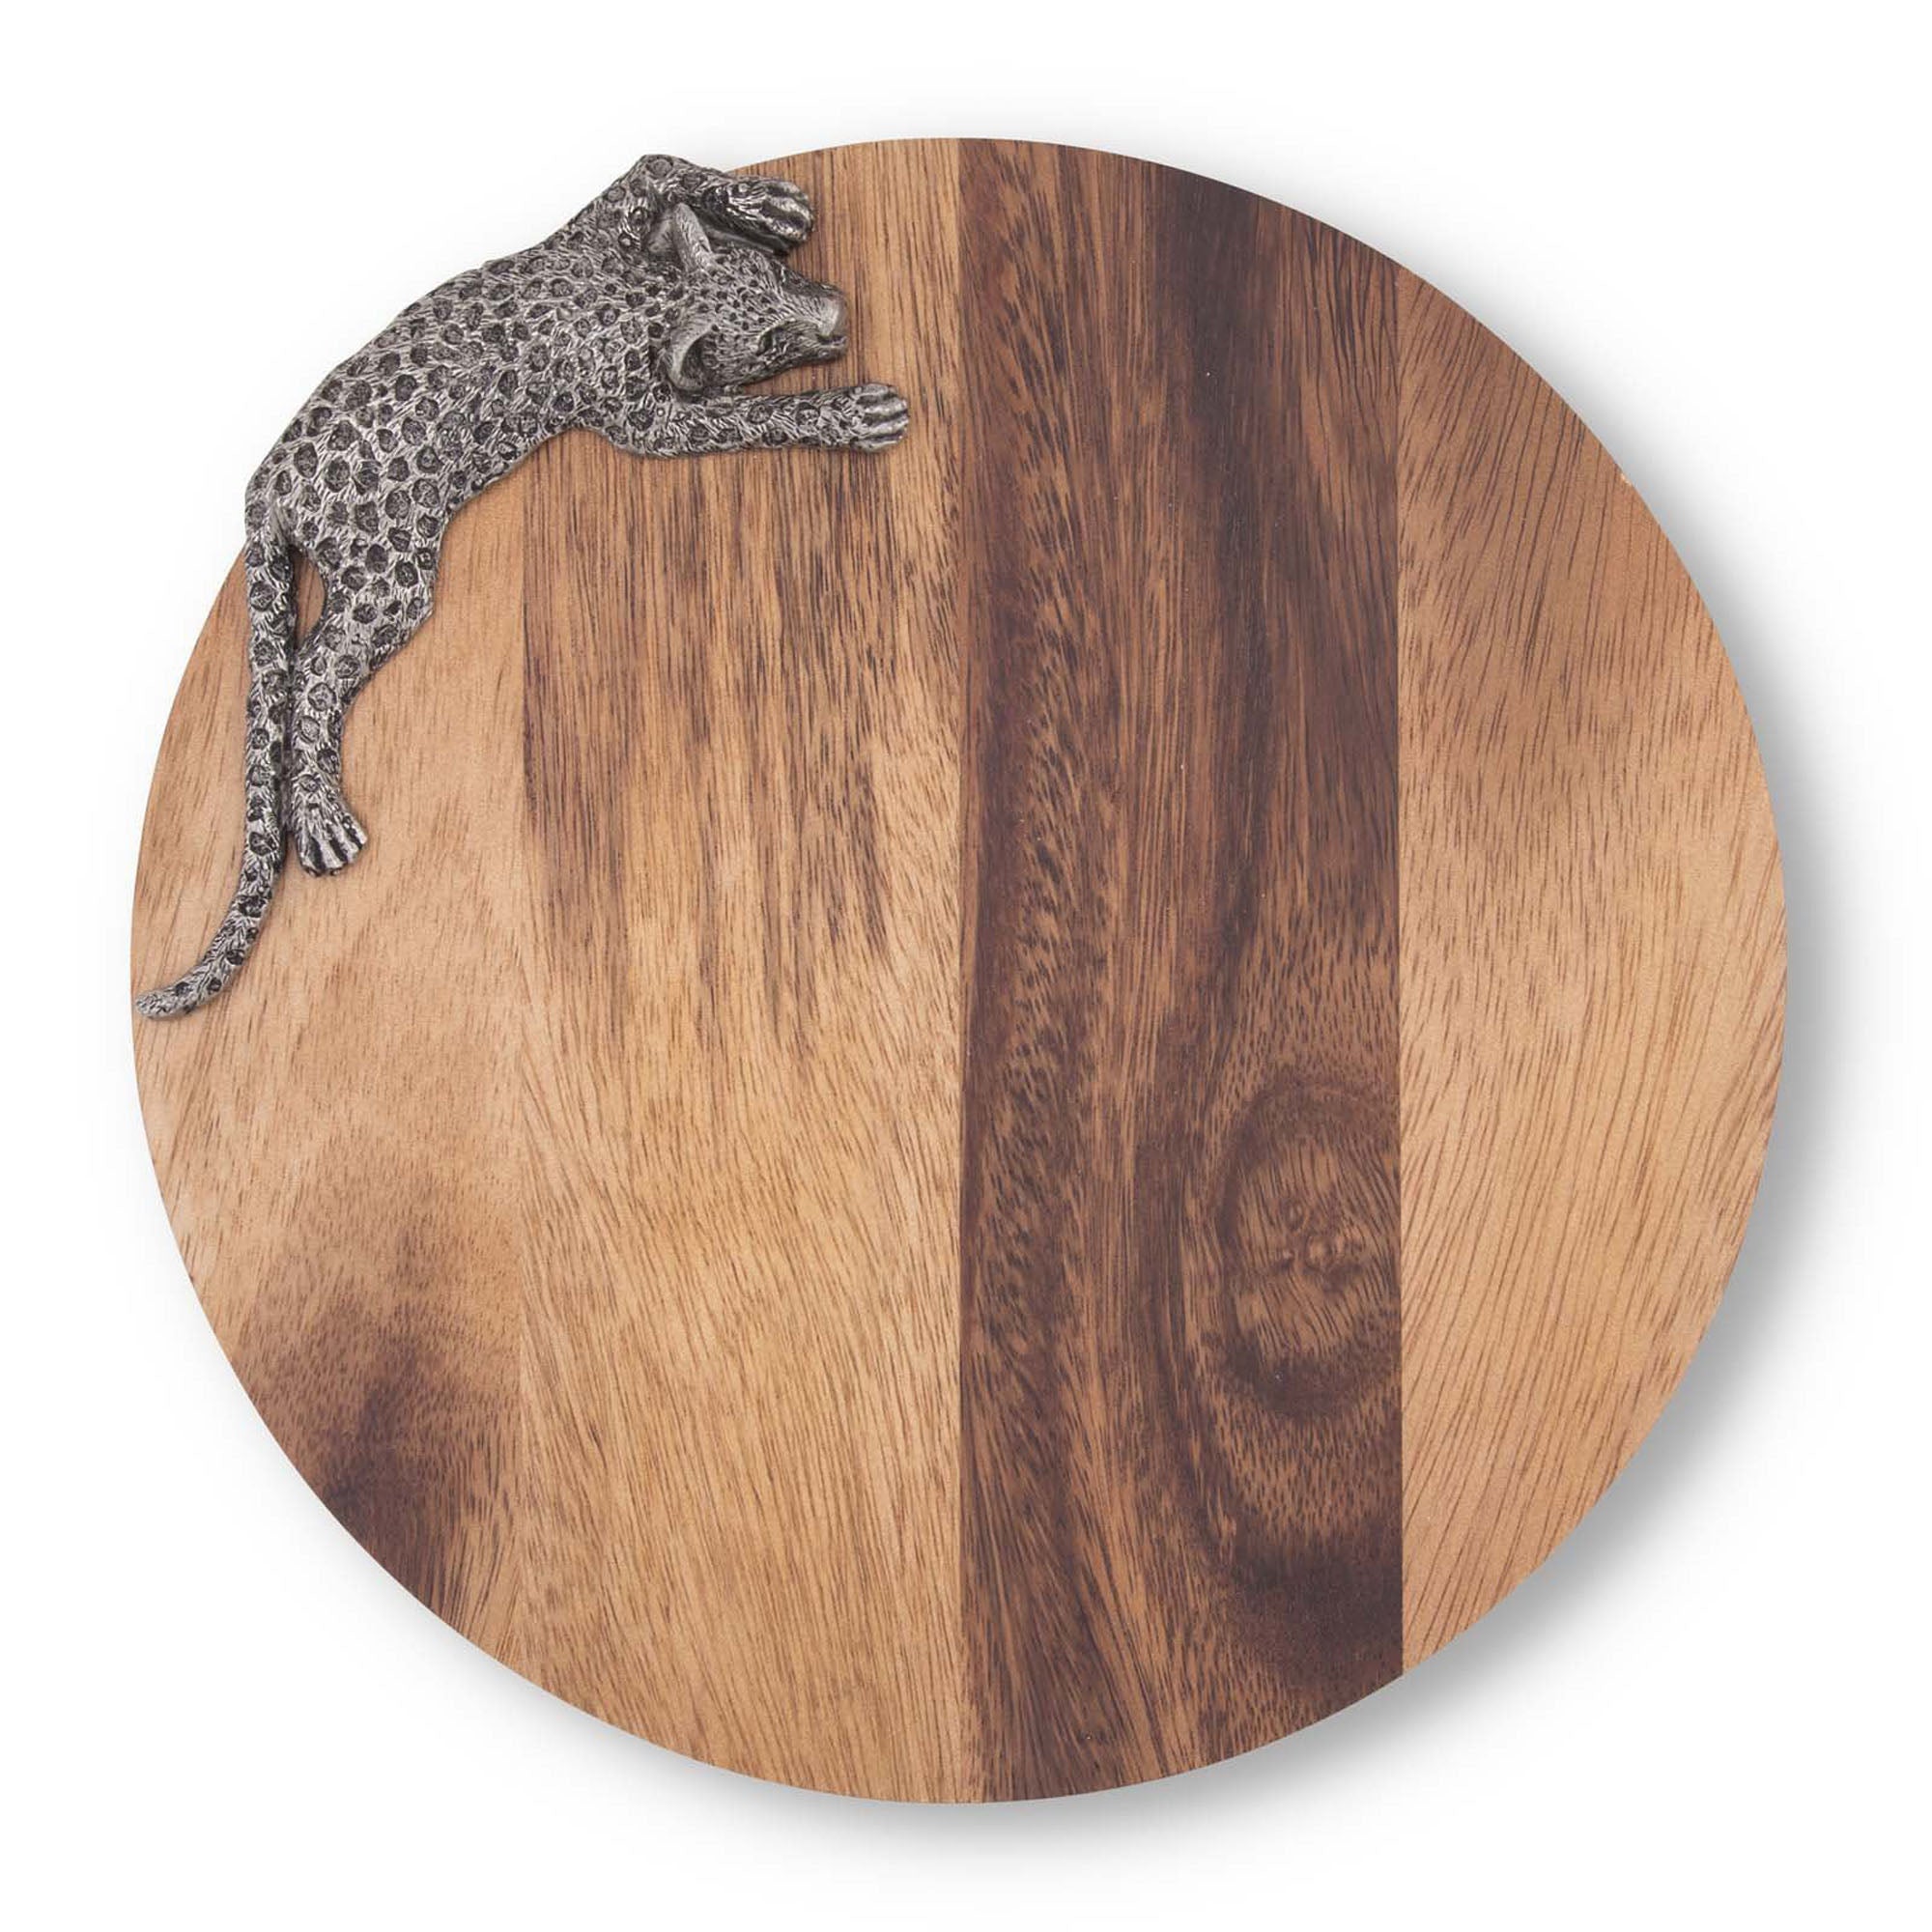 Vagabond House Leopard Cheese Board Product Image